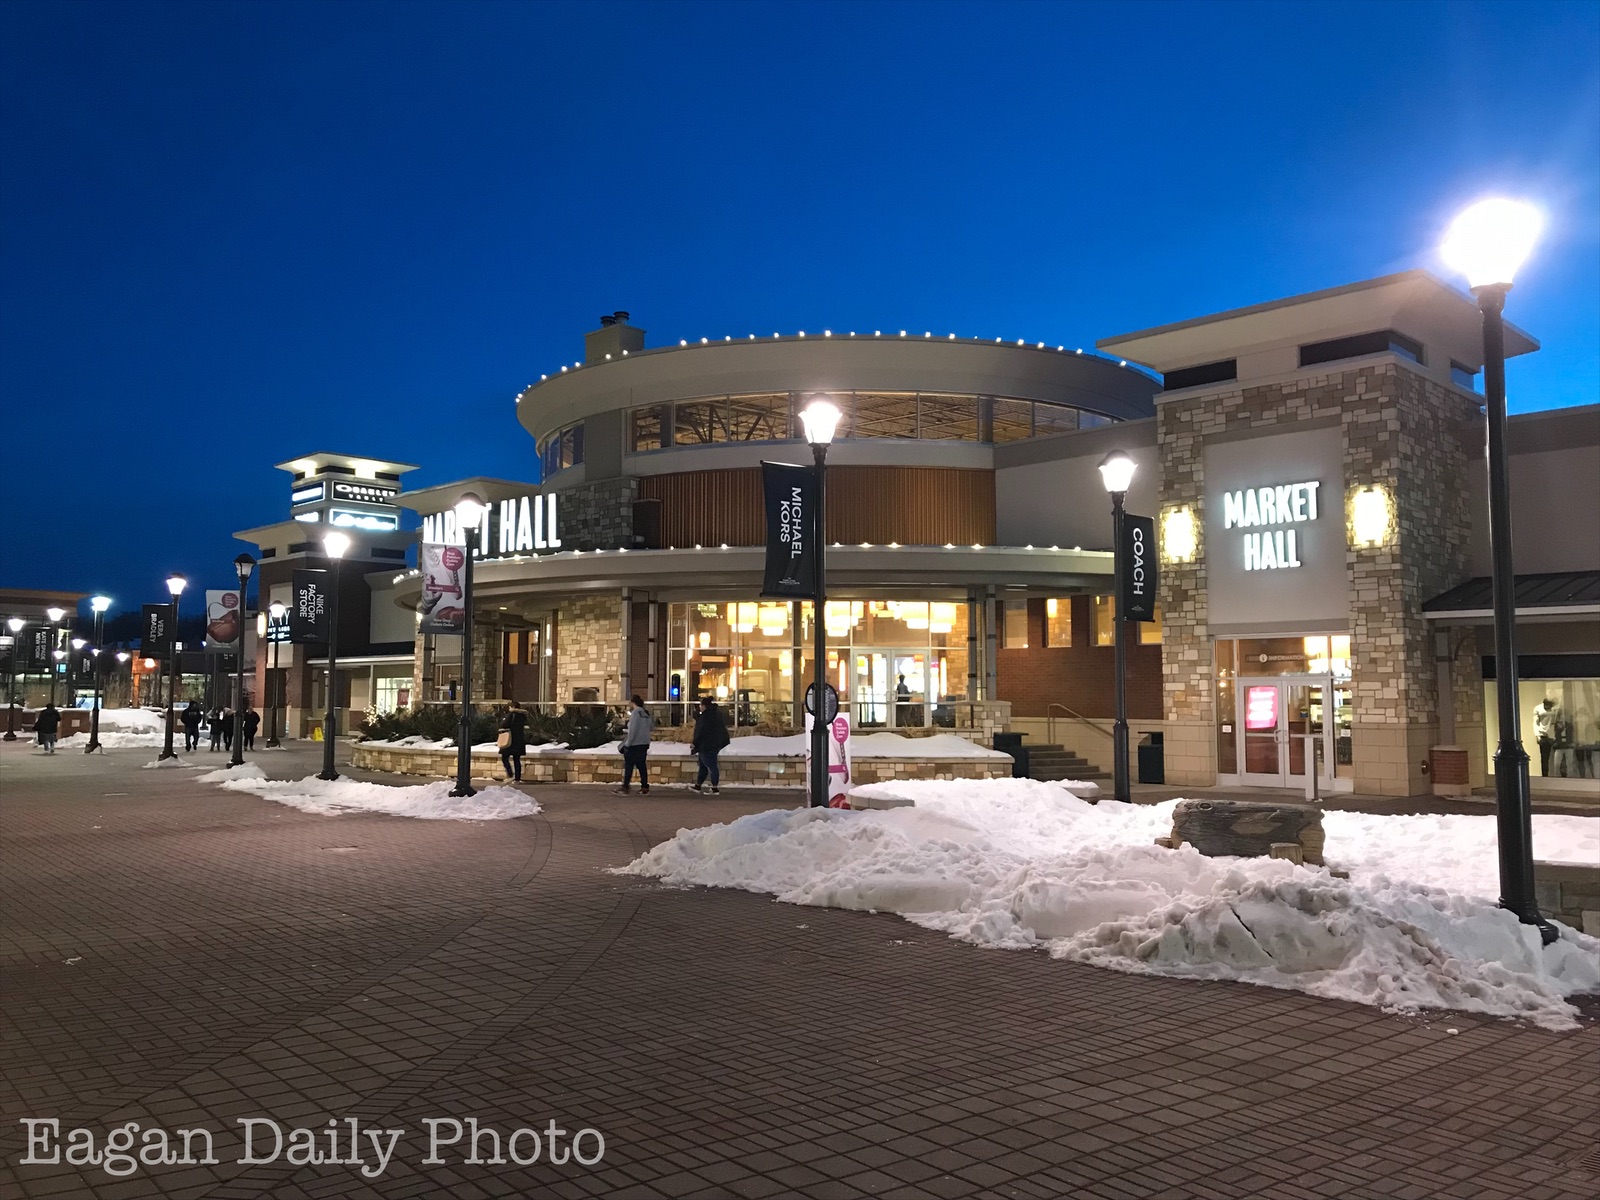 Eagan Daily Photo: Shopping and strolling